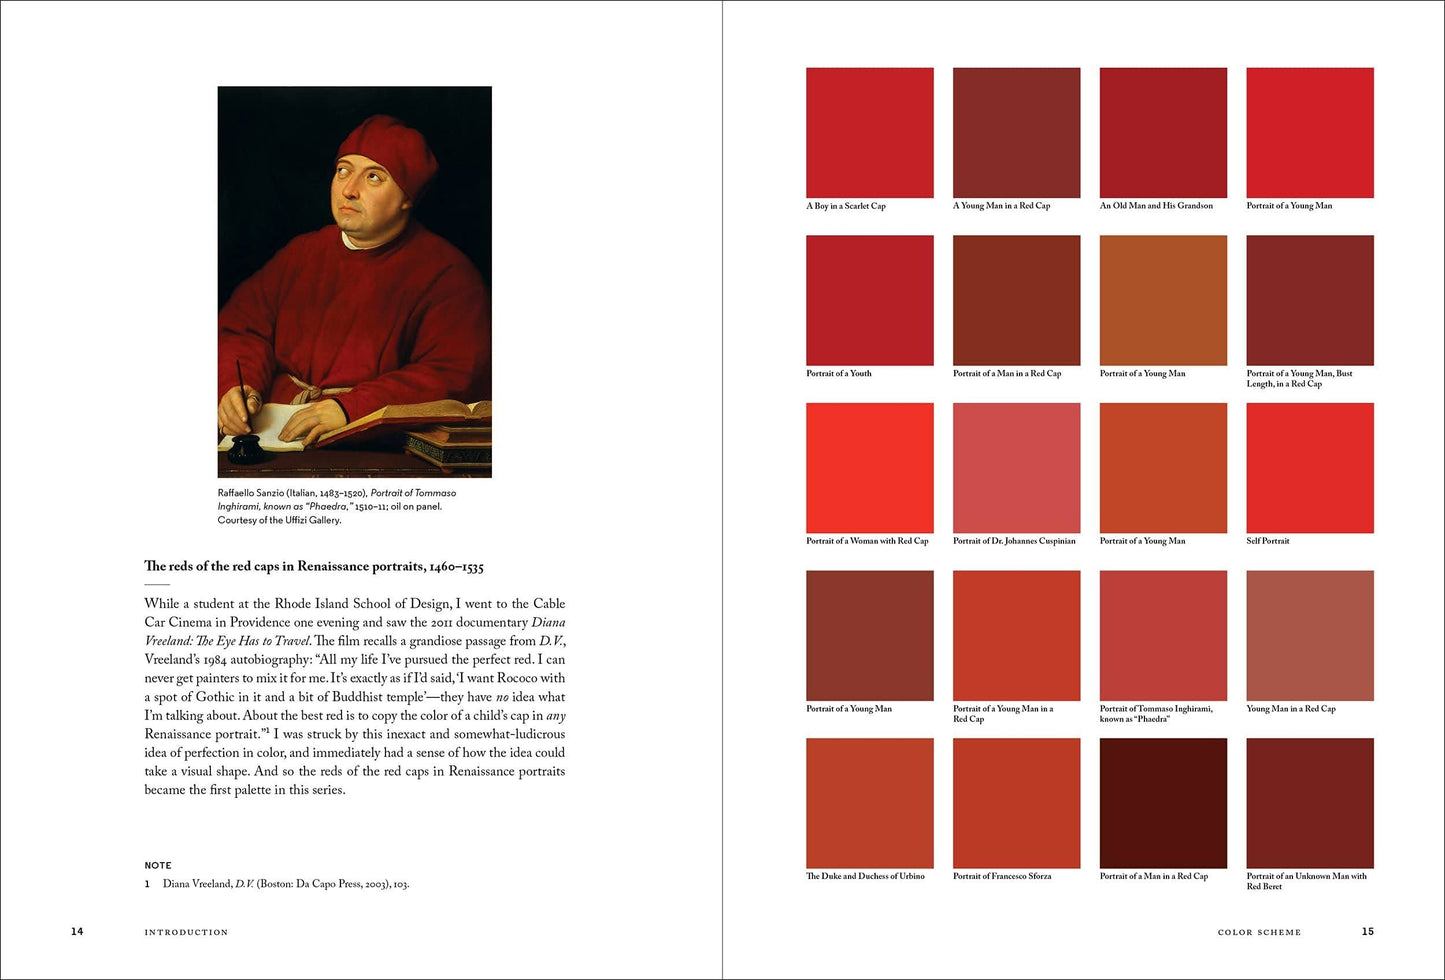 Color Scheme: An Irreverent History of Art and Pop Culture in Color Palettes